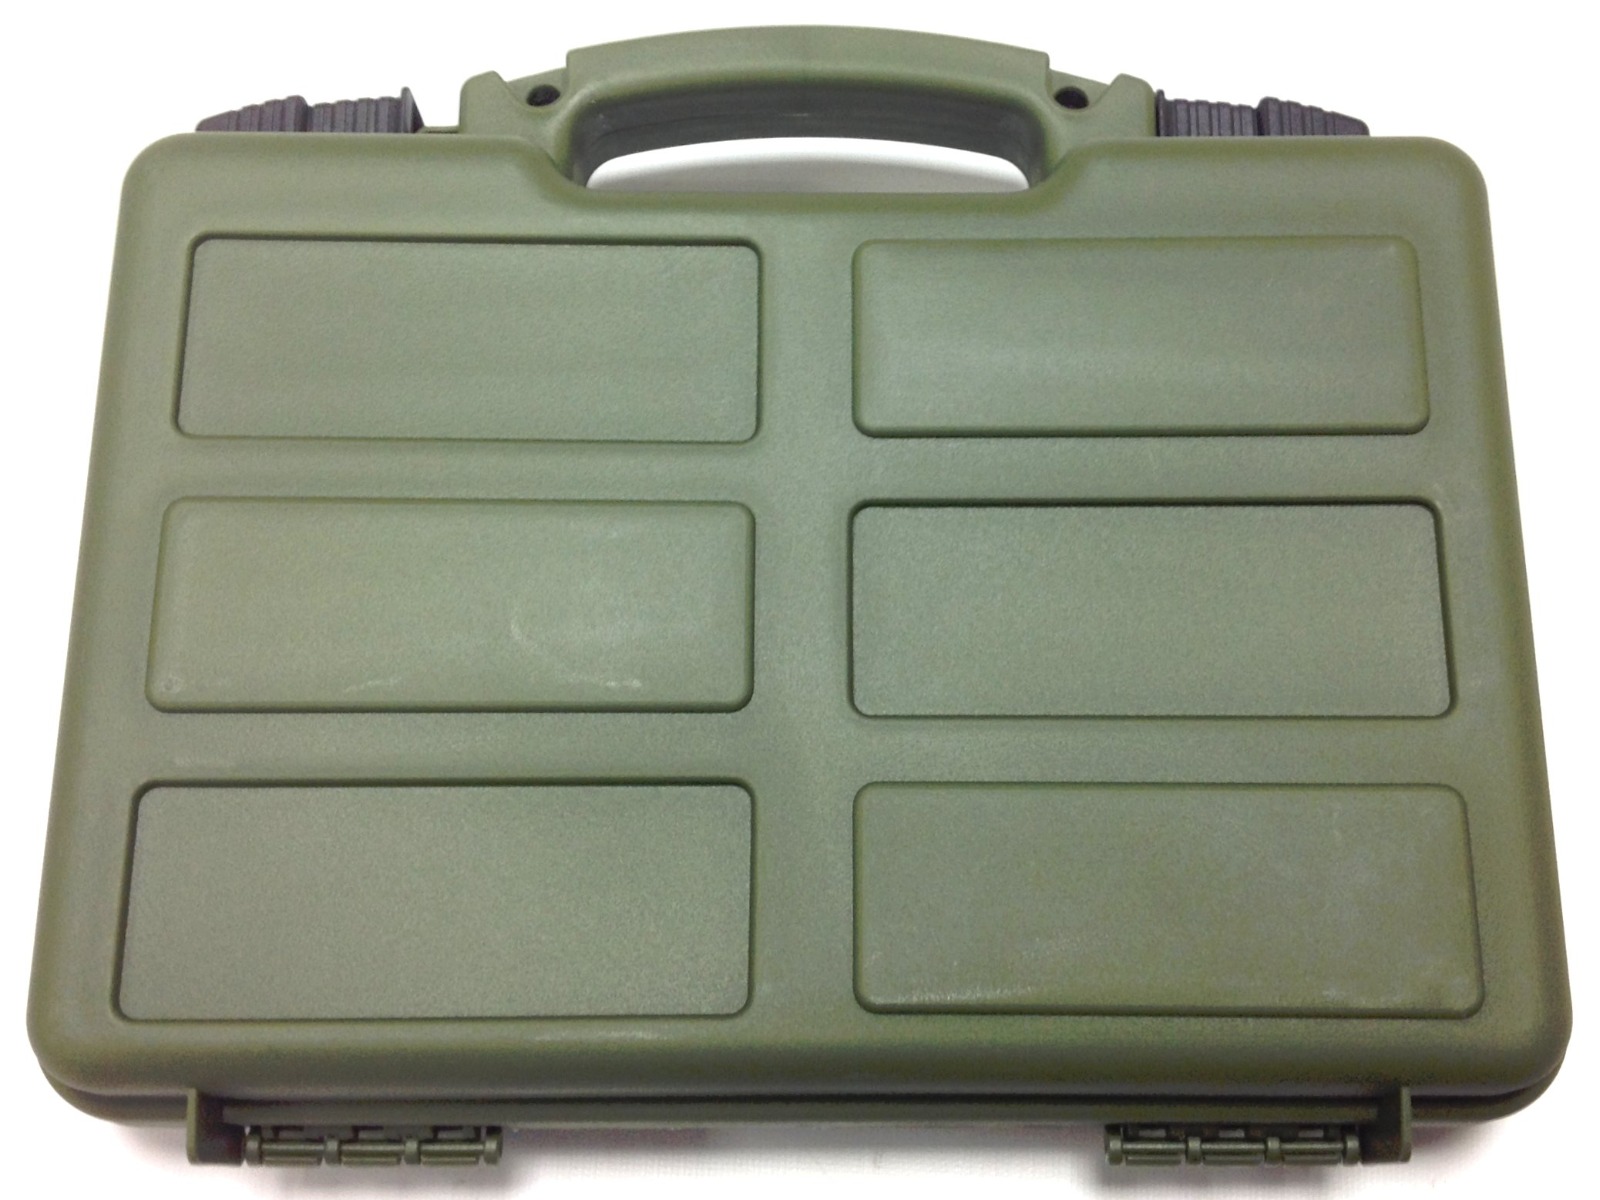 Nuprol Green Air Pistol Carry & Storage Case